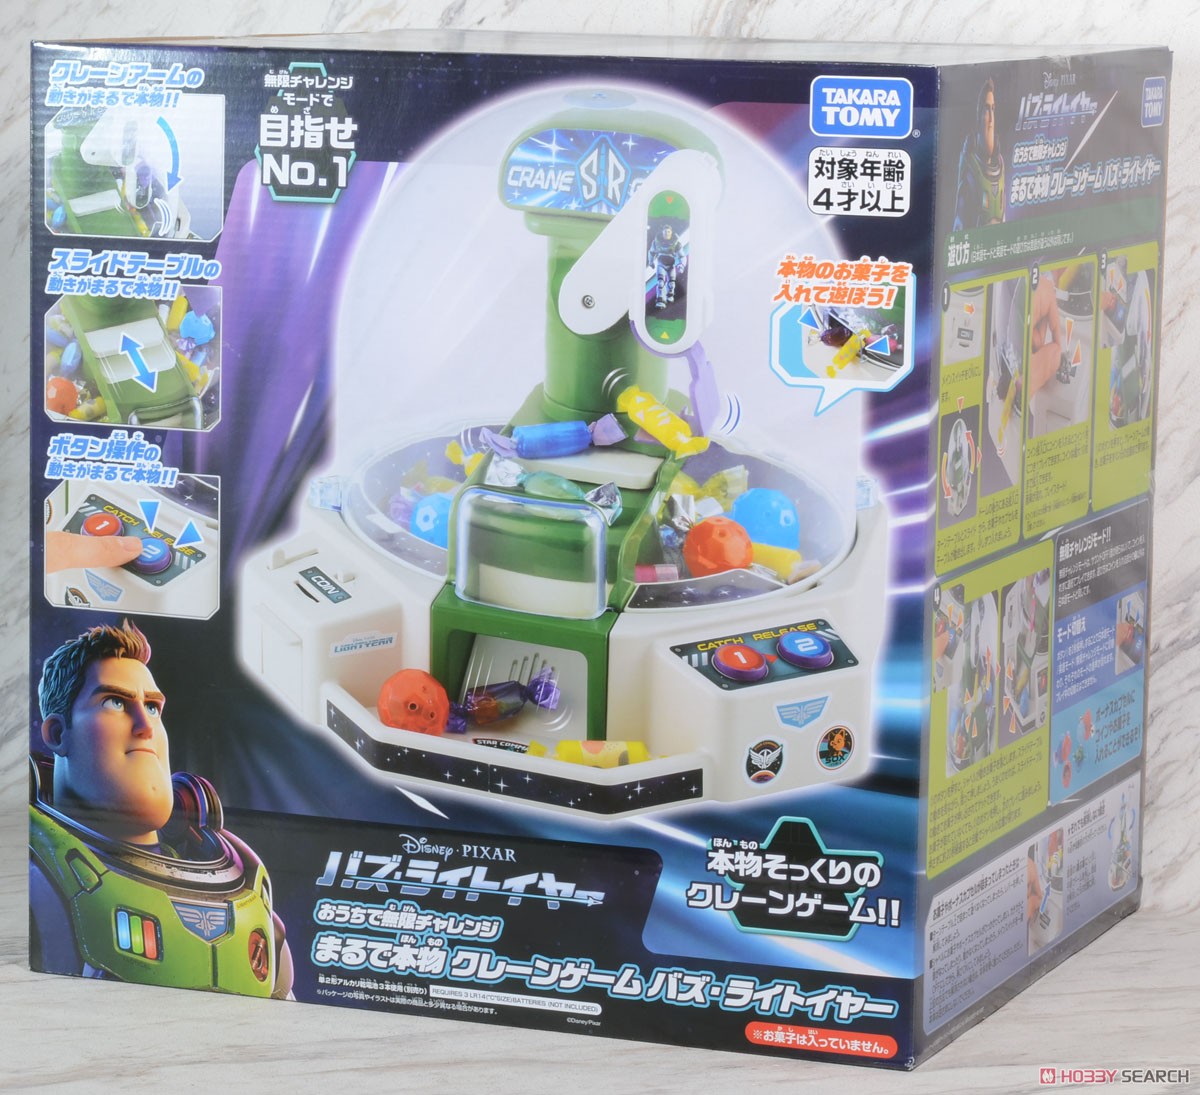 It Looks Realistic ! at Home Claw Crane Buzz Lightyear (Board Game) Package1